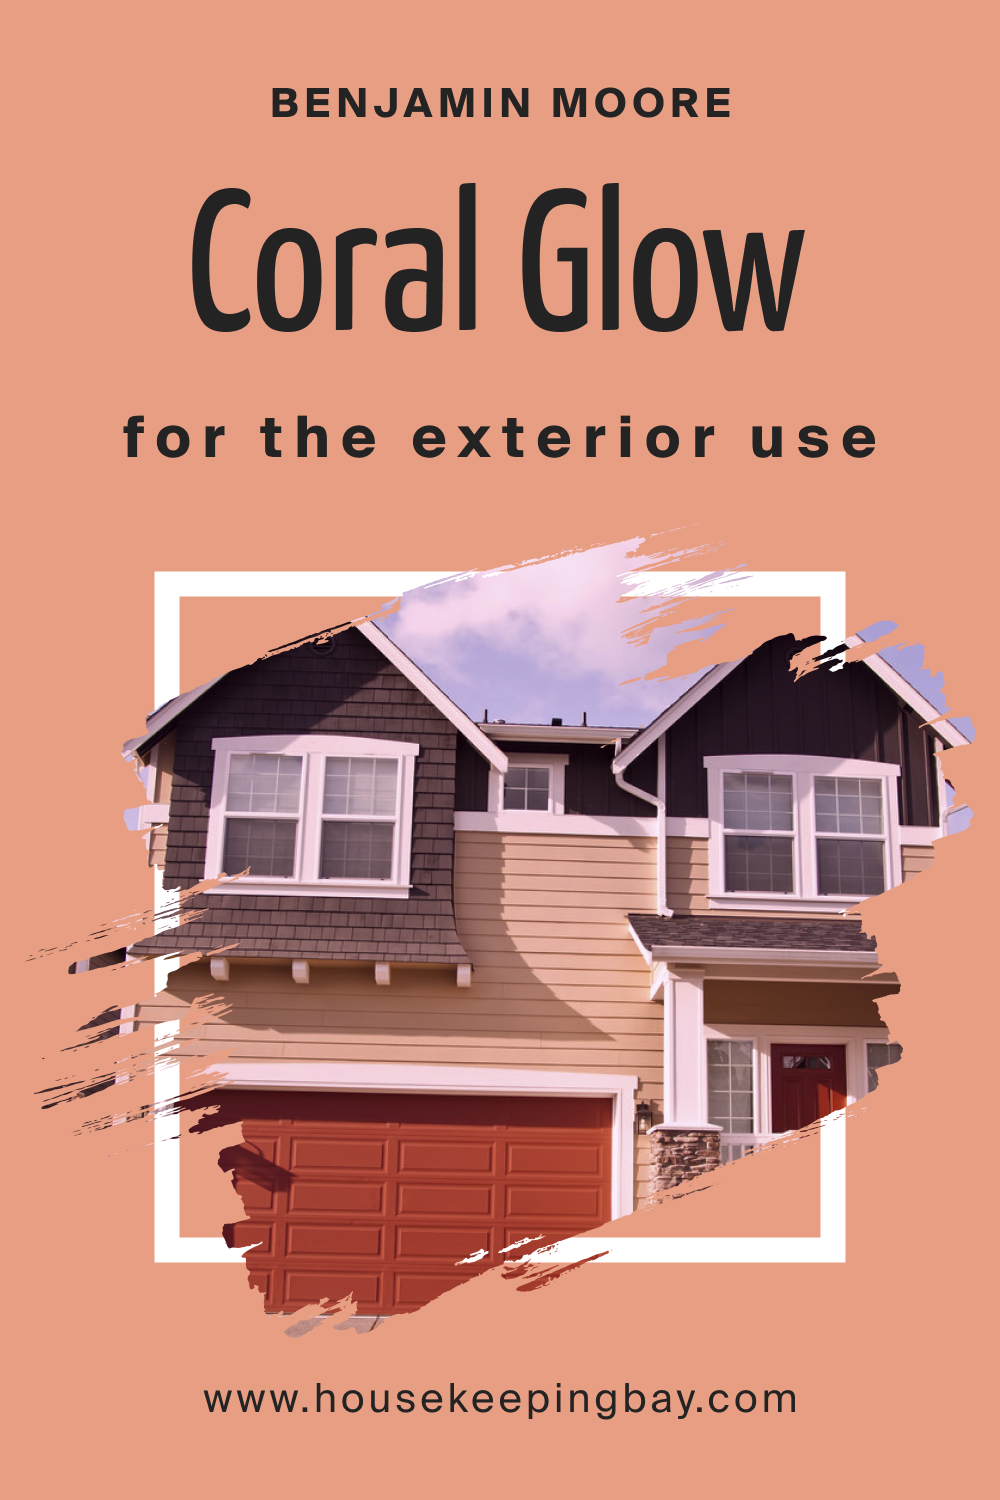 Benjamin Moore. Coral Glow 026 for the Exterior Use